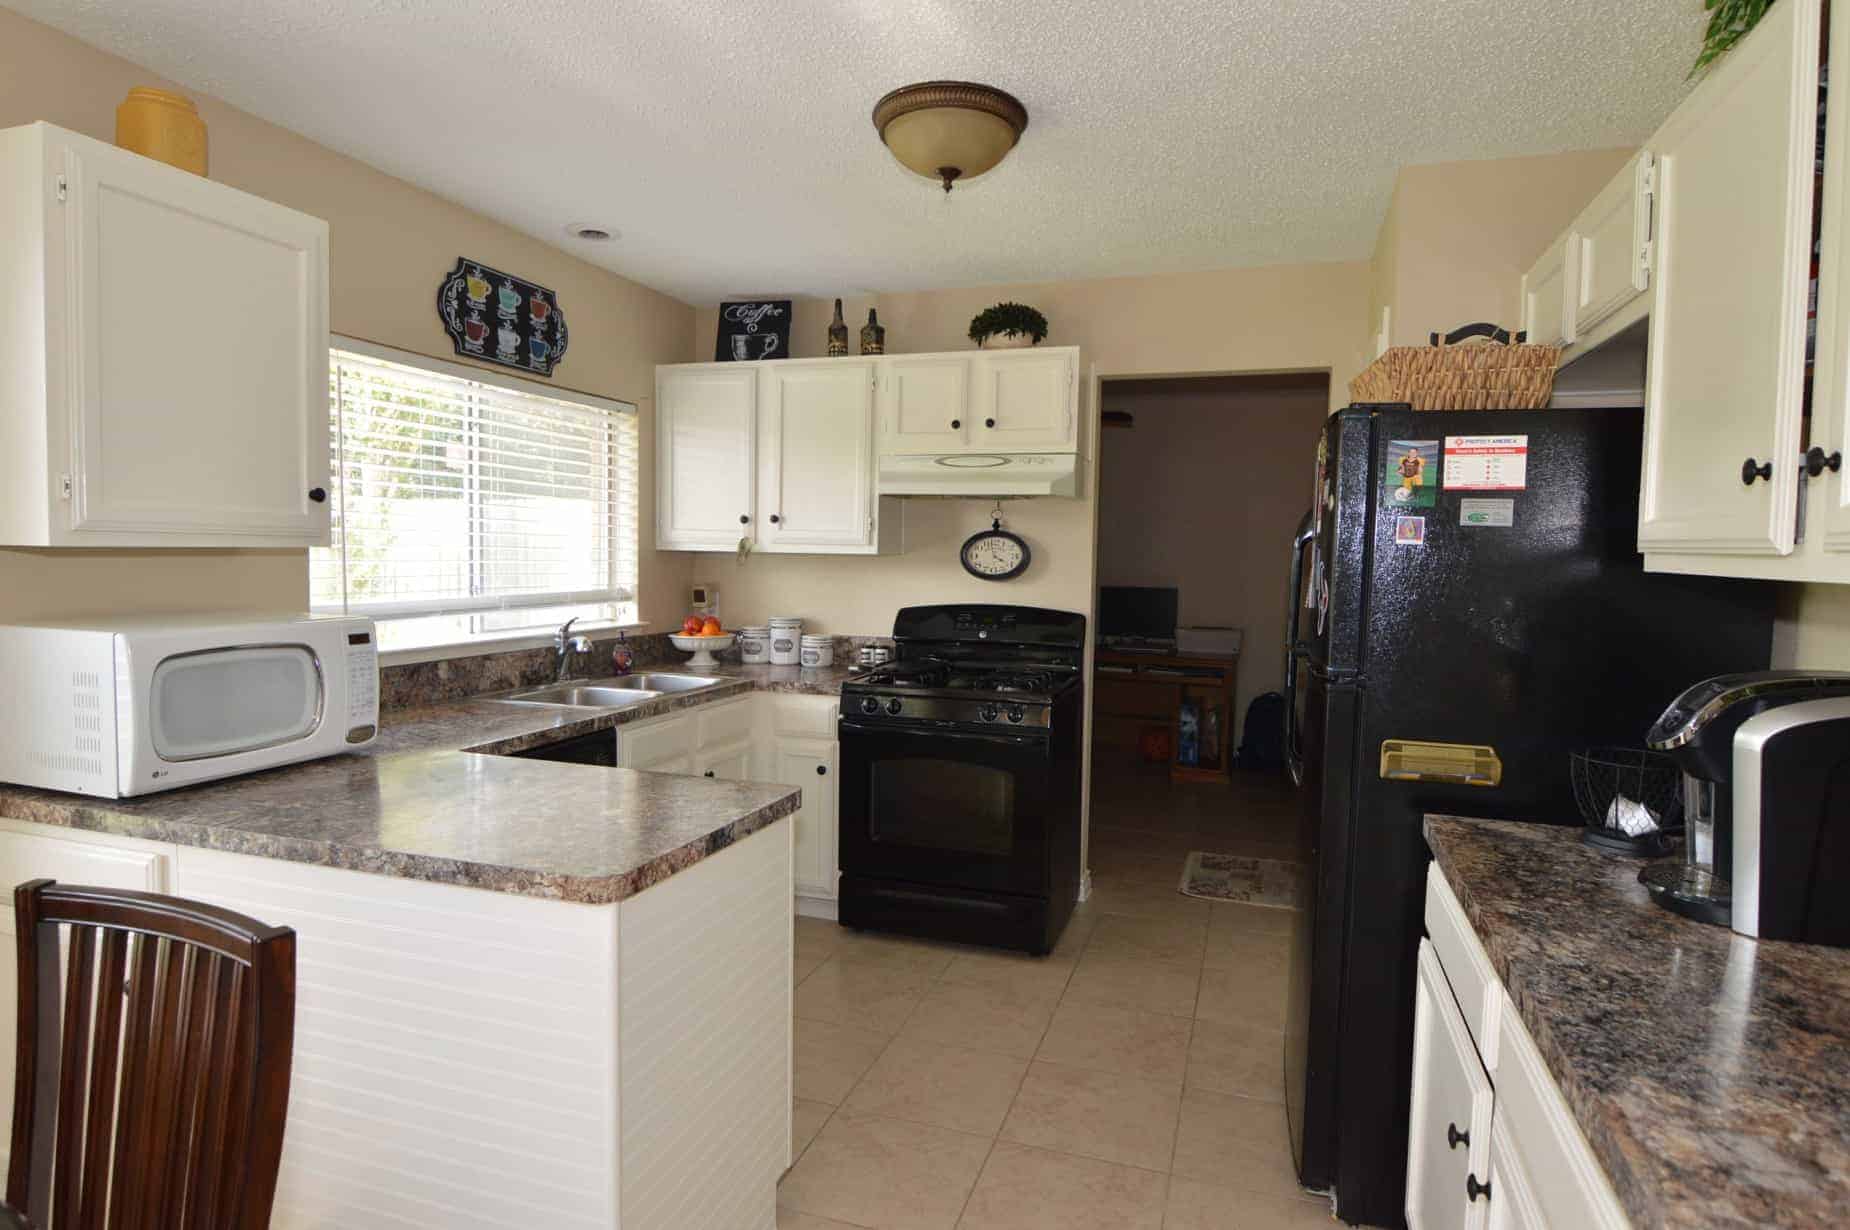 Kitchen of 12030 Yearling Dr, Houston, TX 77065